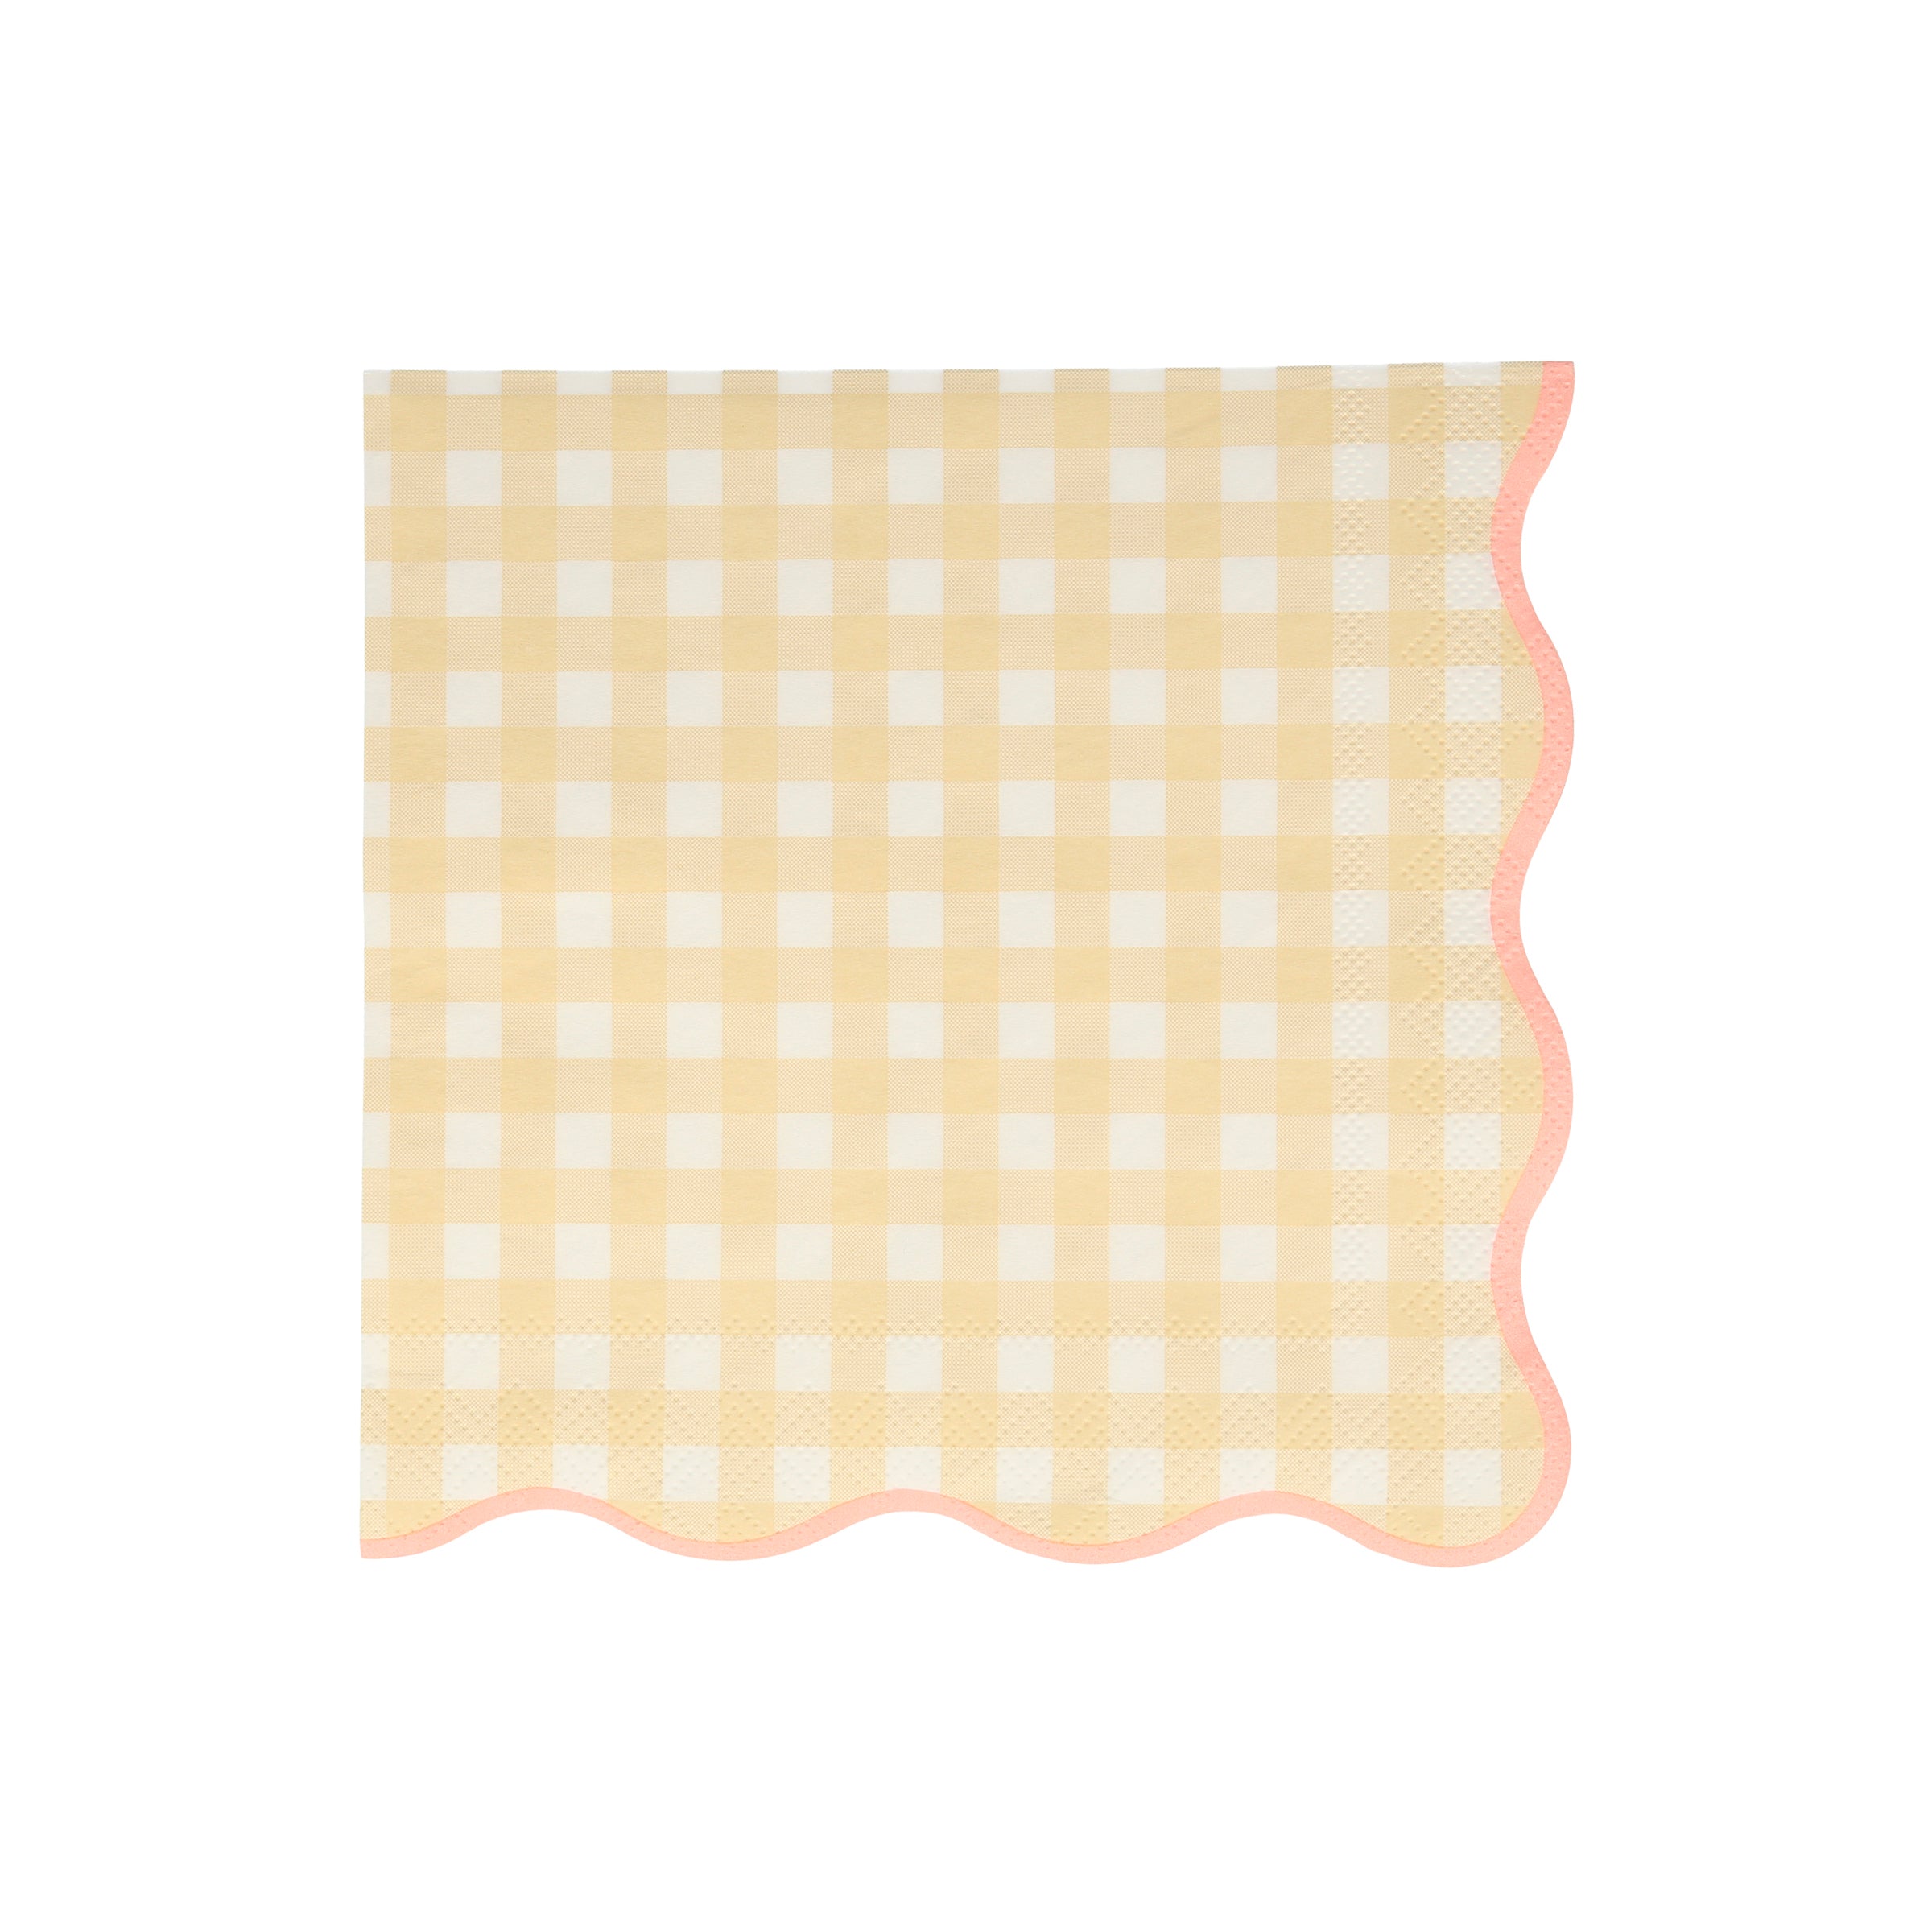 Our disposable napkins with a gingham print and scalloped edge will look amazing on your party table.